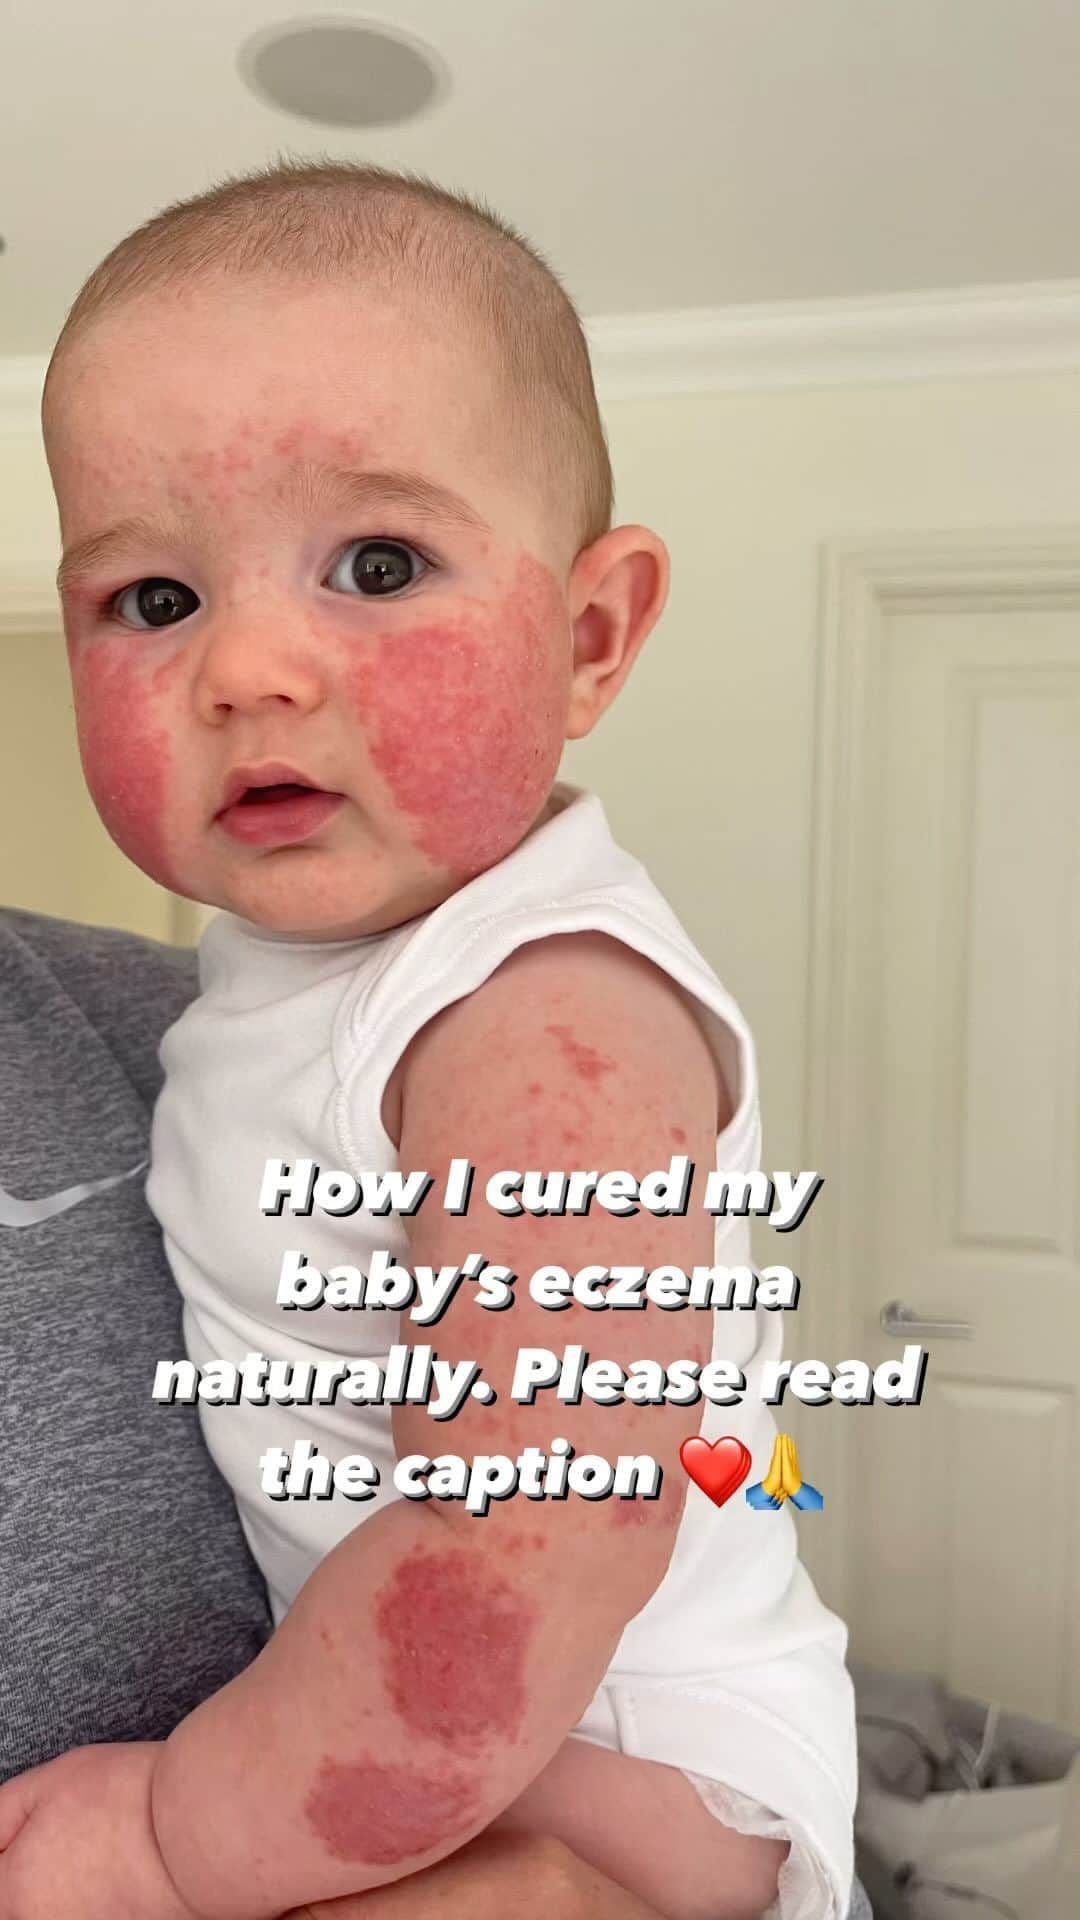 サム・フェアーズのインスタグラム：「⚠️This is not medical advice ⚠️ I’ve wanted to share this with you for so long now. It really does break my heart looking at these images and videos 💔  We healed Edward NATURALLY 🌱 please do not write anything negative, I just really wanted to share with you what we researched and what we done to heal Edward 🙏 It took us a few months to really understand how babies get eczema. It was totally new to us as parents, Paul & Rosie didn’t have it so we really didn’t know what why or how Edward got it so severely 😔  There is a strong link between eczema and the gut and that’s just one piece to the puzzle.. it’s a case of vitamin & mineral deficiency too, which was a shock to me as I was exclusively breastfeeding Edward. We had to make many changes to our diet.  -We mainly eliminated eggs, milk, wheat, gluten, refined sugar & no processed foods. -We eat lots of grass fed lamb and meat.  -ONLY use coconut oil when cooking (we use a flavourless organic one from Amazon)  -SUNSHINE ☀️ this was the most noticeable highlight for us in the process. Every chance we had when the sun was out we would put him in it. -Shilajit (drops in with water)  -liquid vitamin D was great and easy to give Edward -Water, we added ION gut for kids to every drink he had -Bath in Epsom salts, apple cider vinegar & clay. Small amounts of each a few times a week -I was taking intracellular sea moss capsules & a Plant calcium with vitamin D3, K2, and C.  -I also got a red light from Amazon and would occasionally hold it over him whilst he was playing or eating.  -We used pure organic tallow balm to stop the itching from @fiercenatureuk  3/4 months and it cleared up 🙏 It wasn’t easy, but look at him now ❤️  We have now introduced all foods and he is eating practically everything (in moderation).  I hope this helps anyone who has a baby with eczema. You’re not alone. ❤️ I couldn’t have done this without the advice from @catherine_farrant and my fantastic herbalist @mypronatural for supplying me with all the bits we needed 🙏 Also a shout-out to @iamelliegrey for Edwards hair mineral analysis.」